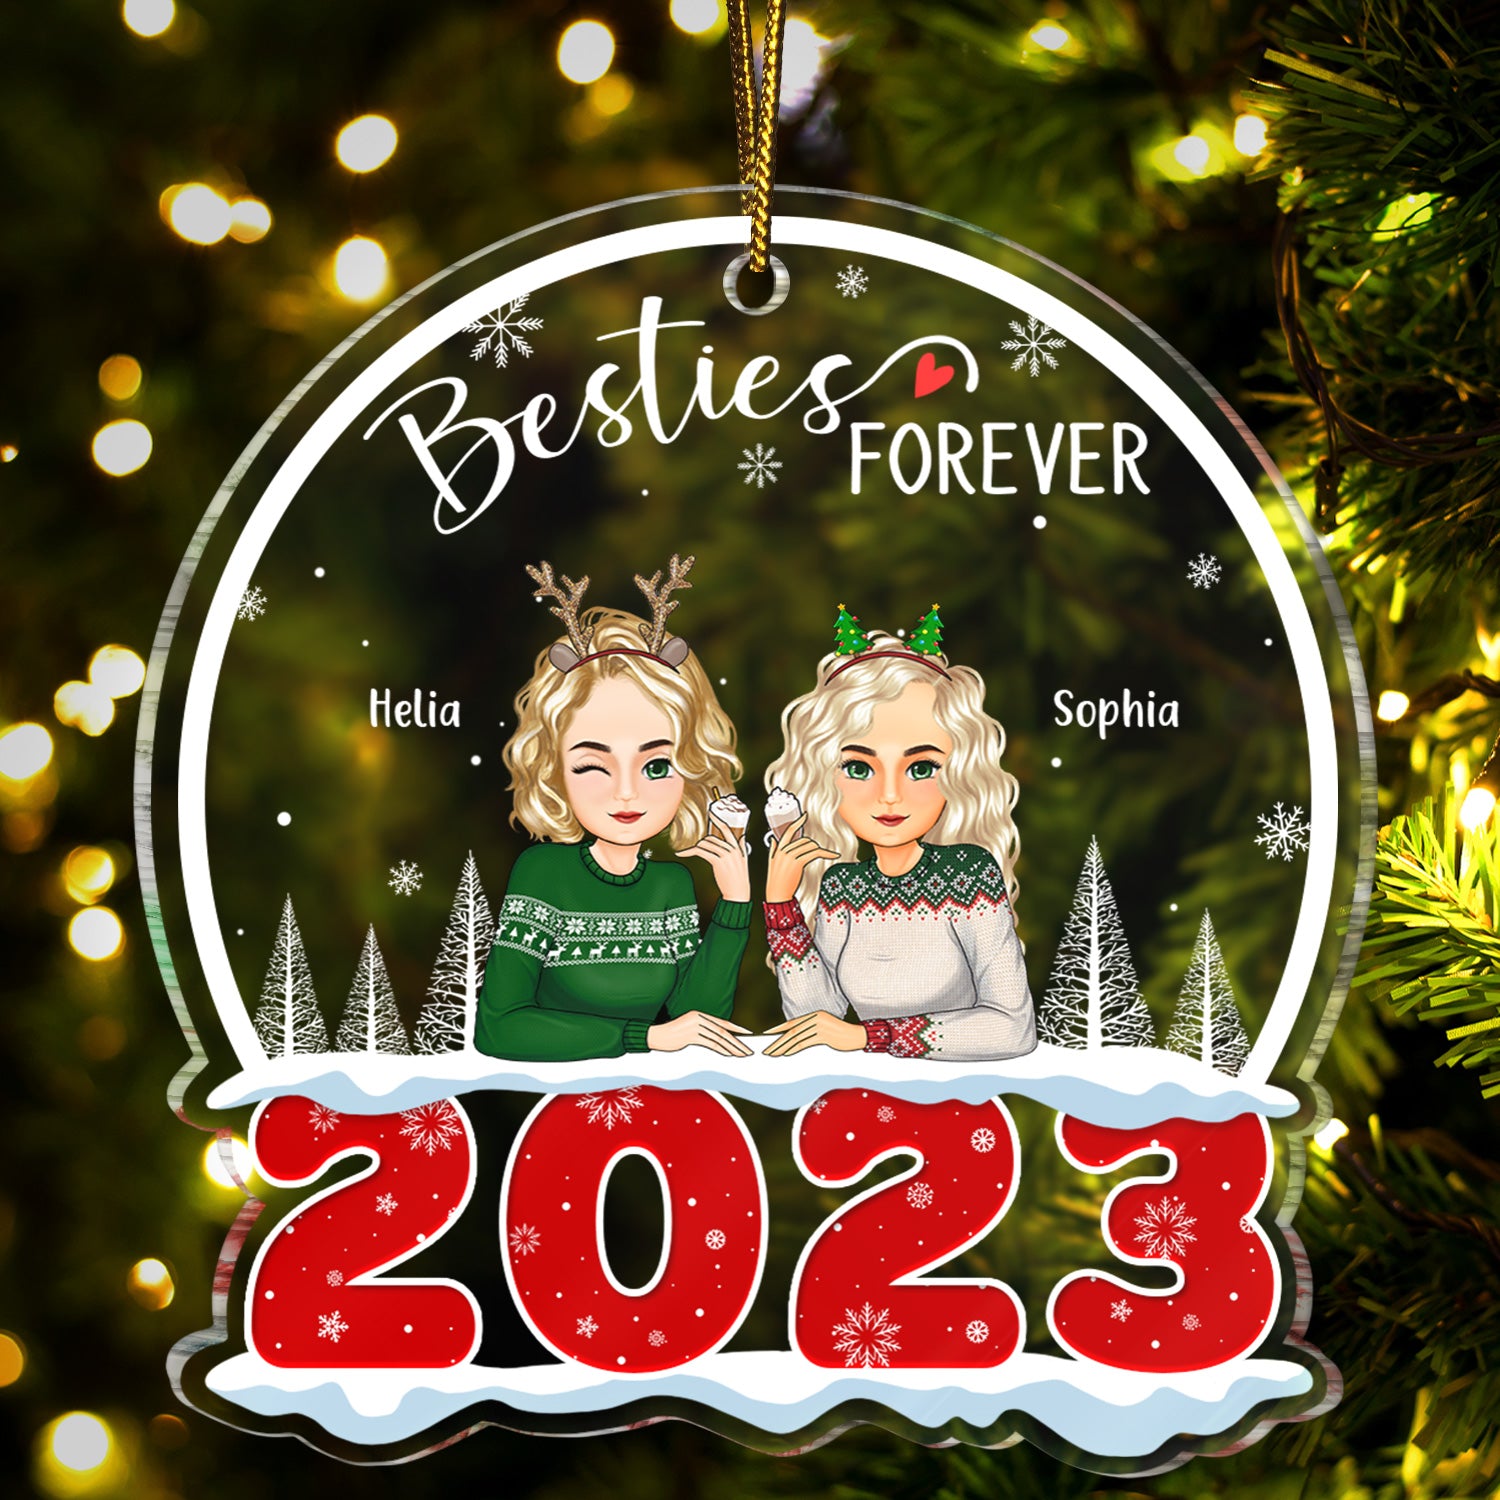 2023 Besties Forever - Christmas Gift For BFF Best Friends, Sisters, Siblings - Personalized Custom Shaped Acrylic Ornament